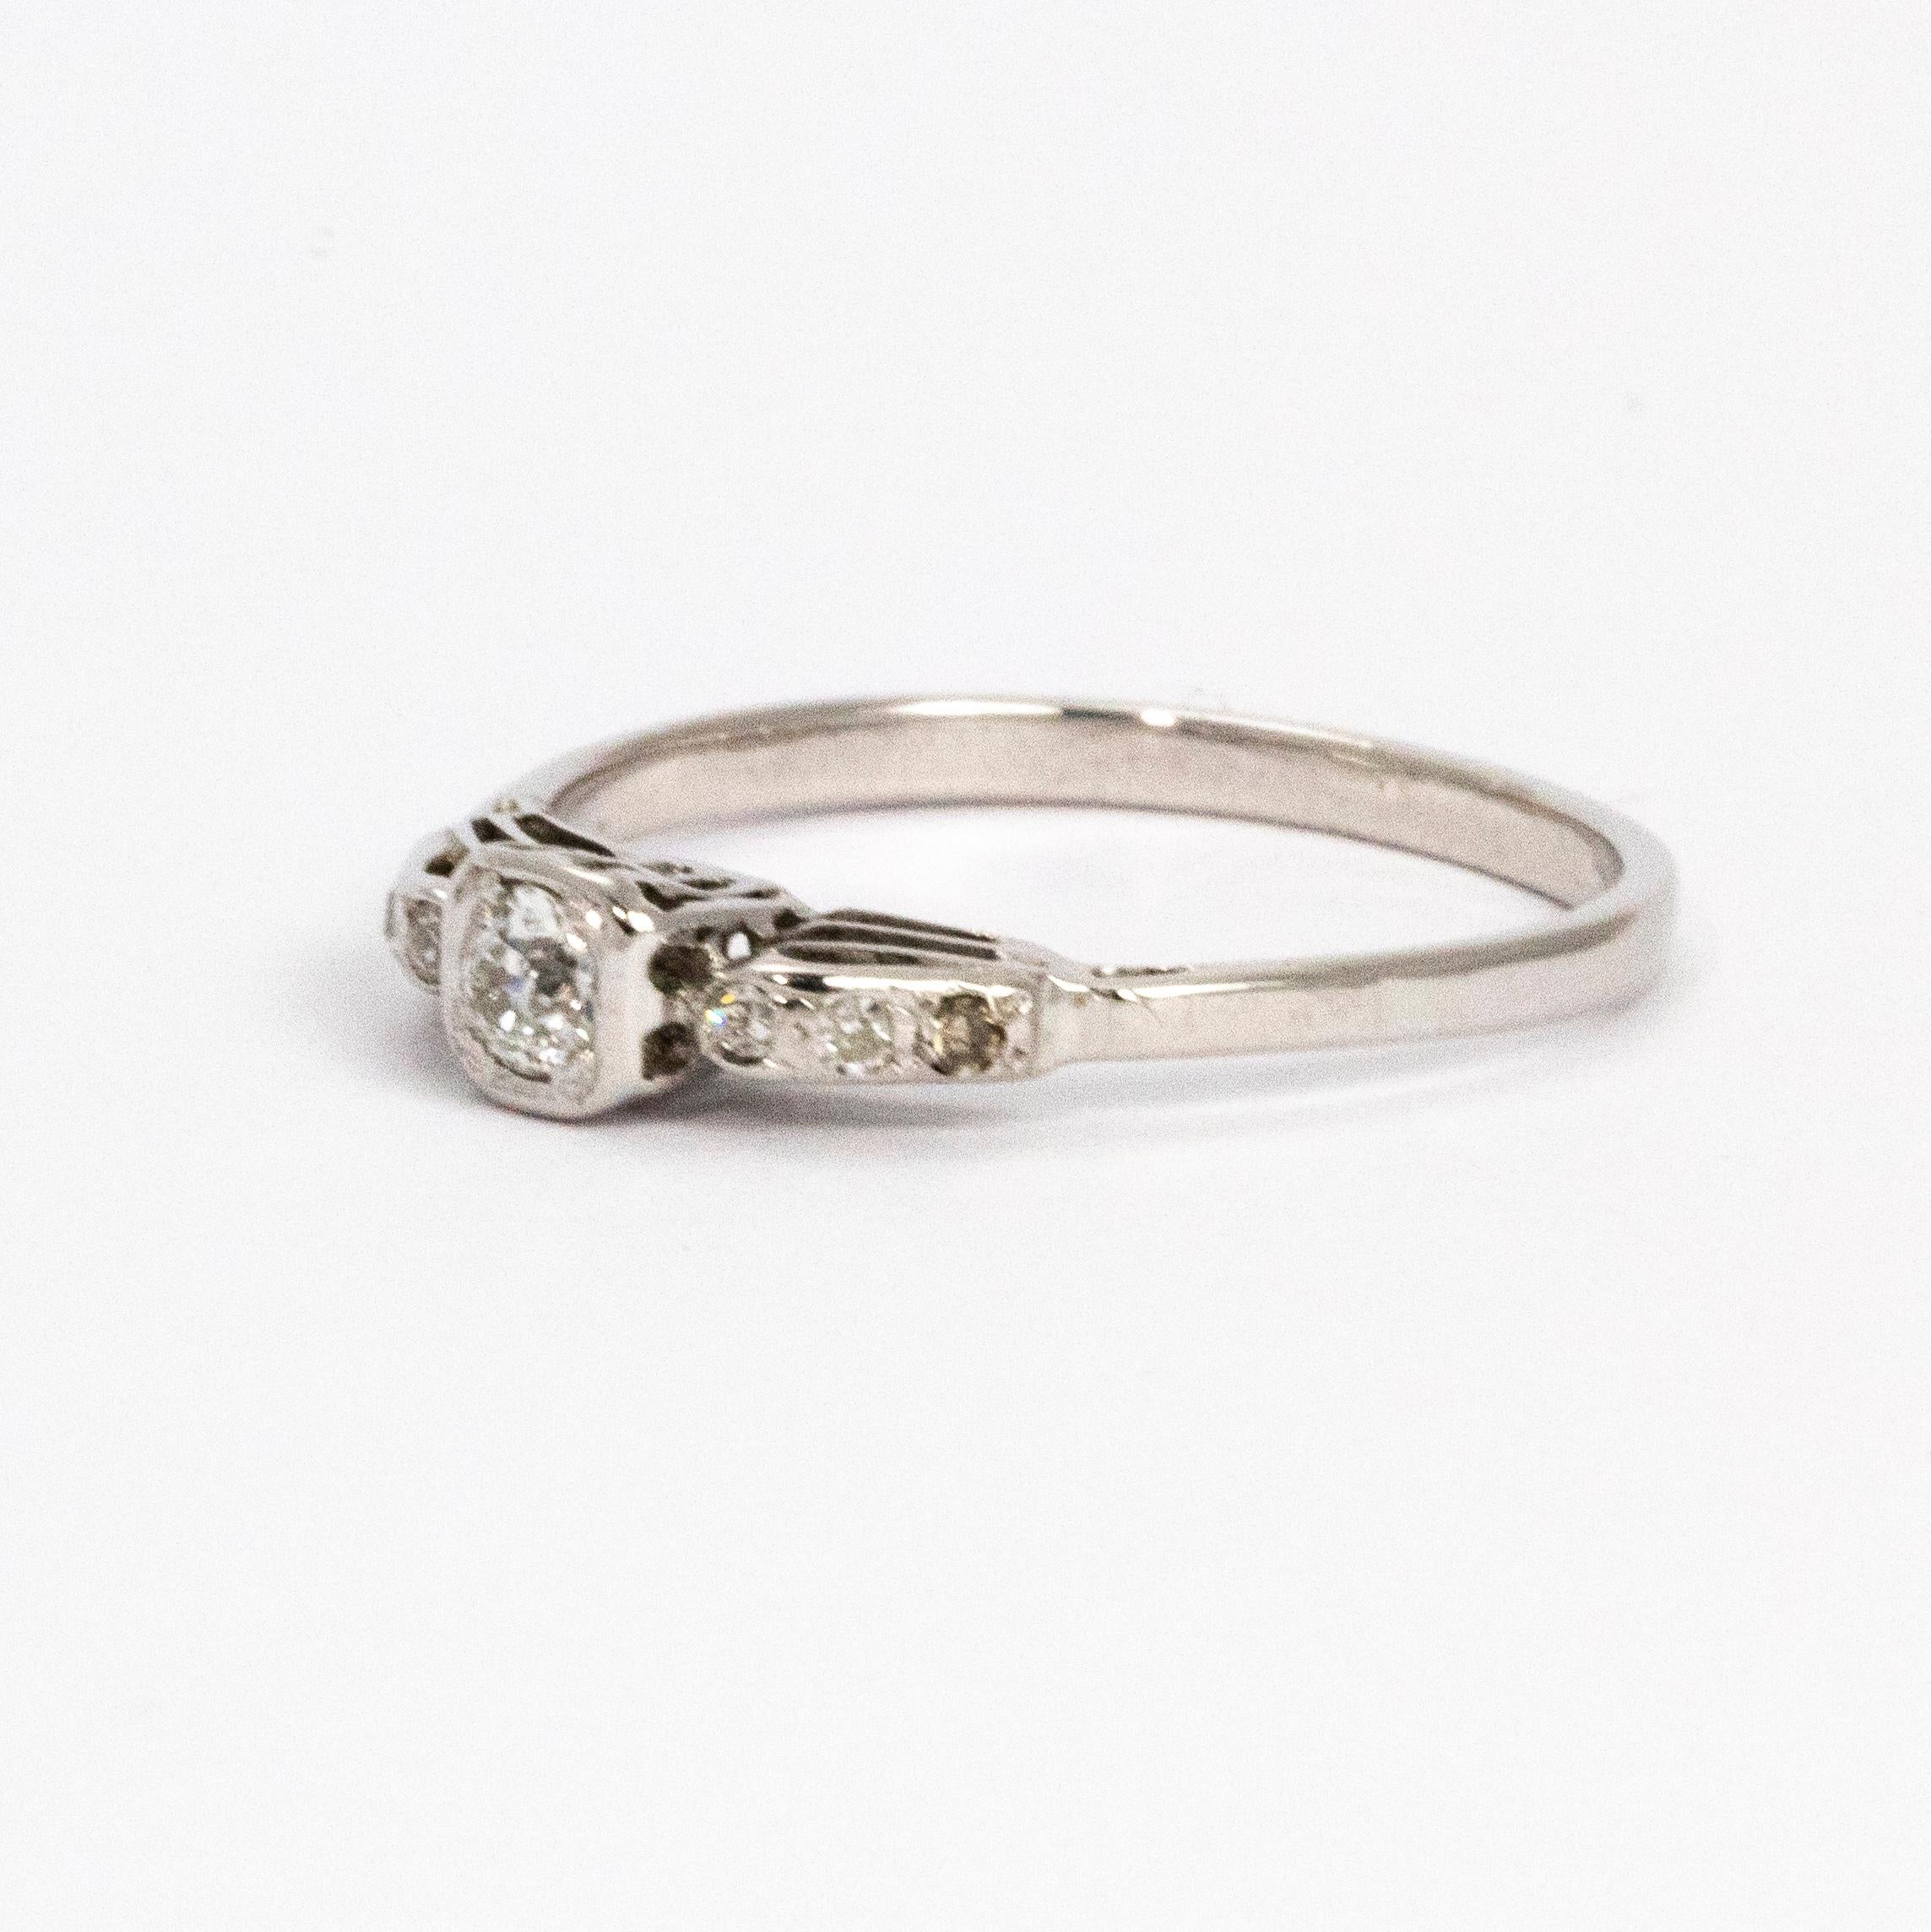 Delicately beautiful Edwardian platinum ring set with old cut diamonds.

Ring Size: N or 6 3/4